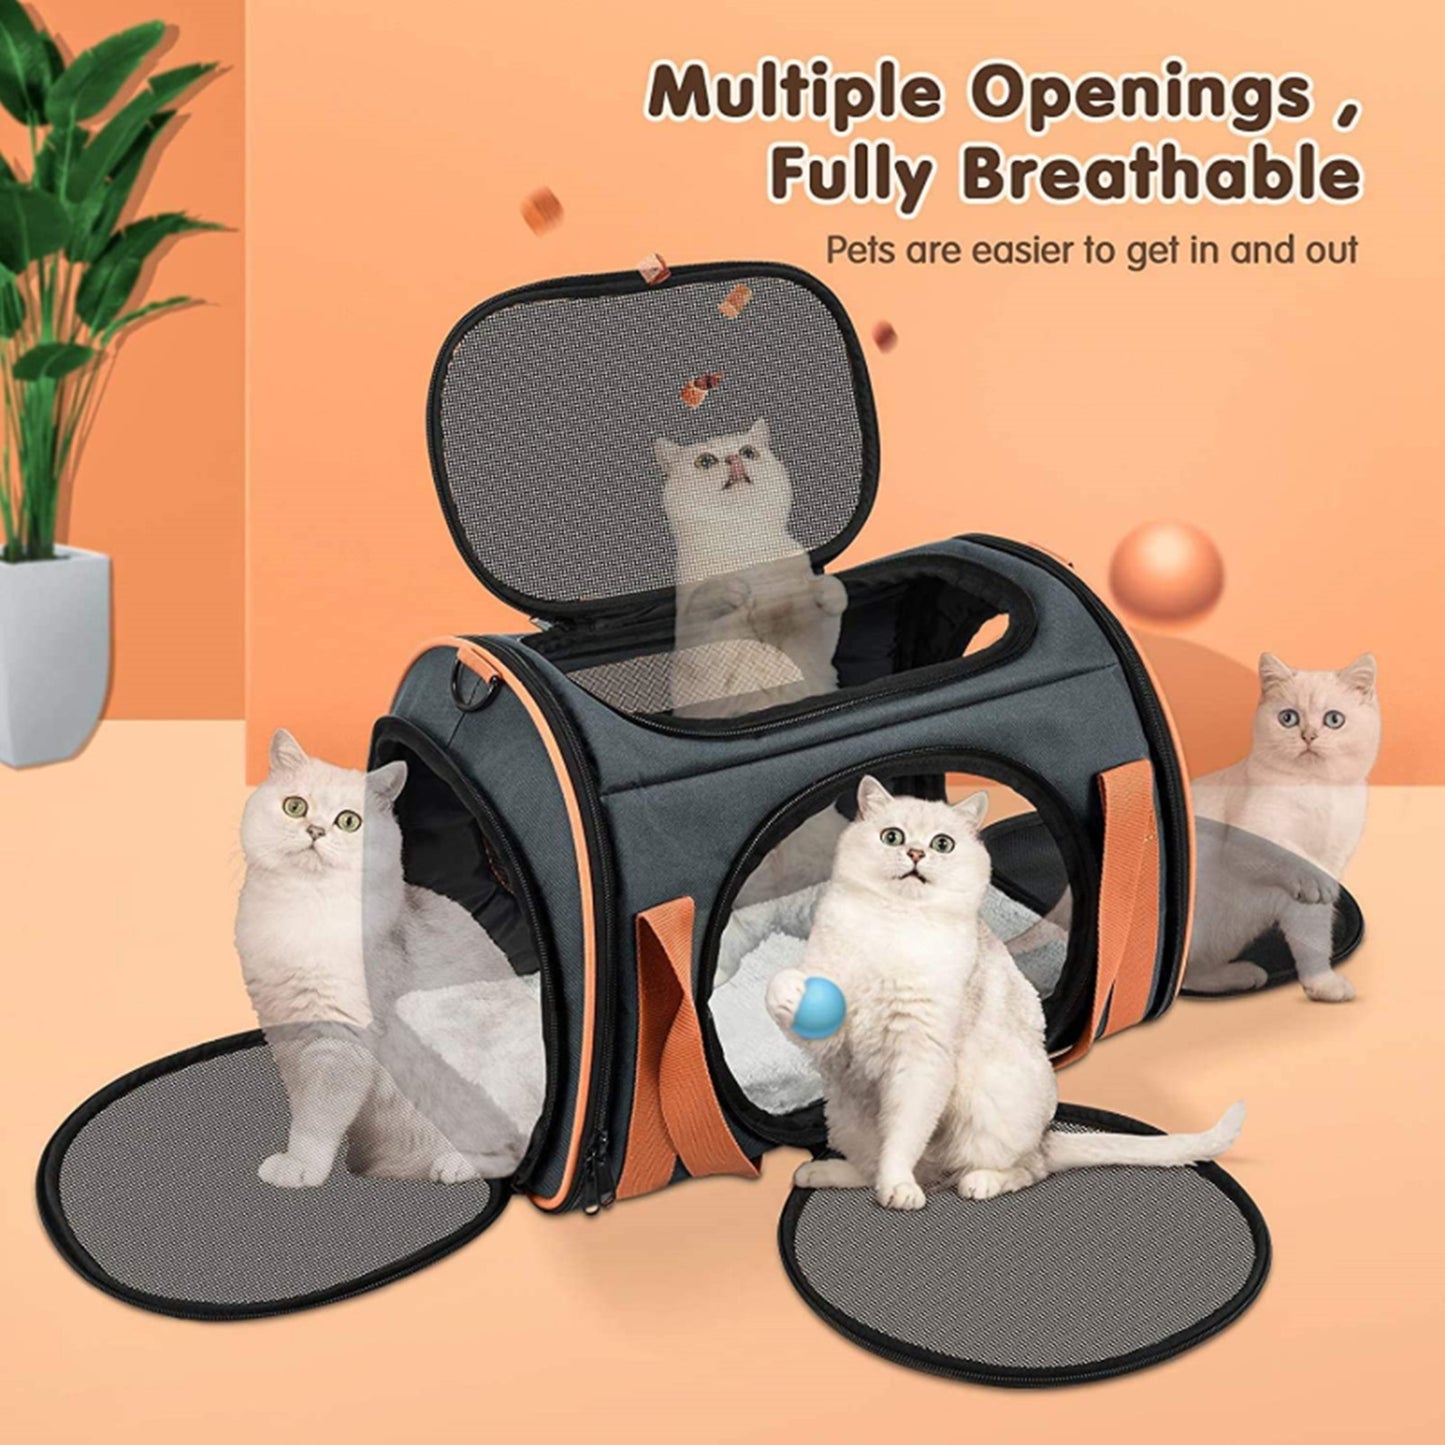 Cat Dog Carrier Dog With Big Space - TSA Airline Approved With Ventilation 5 Mesh Windows 4 Open Doors